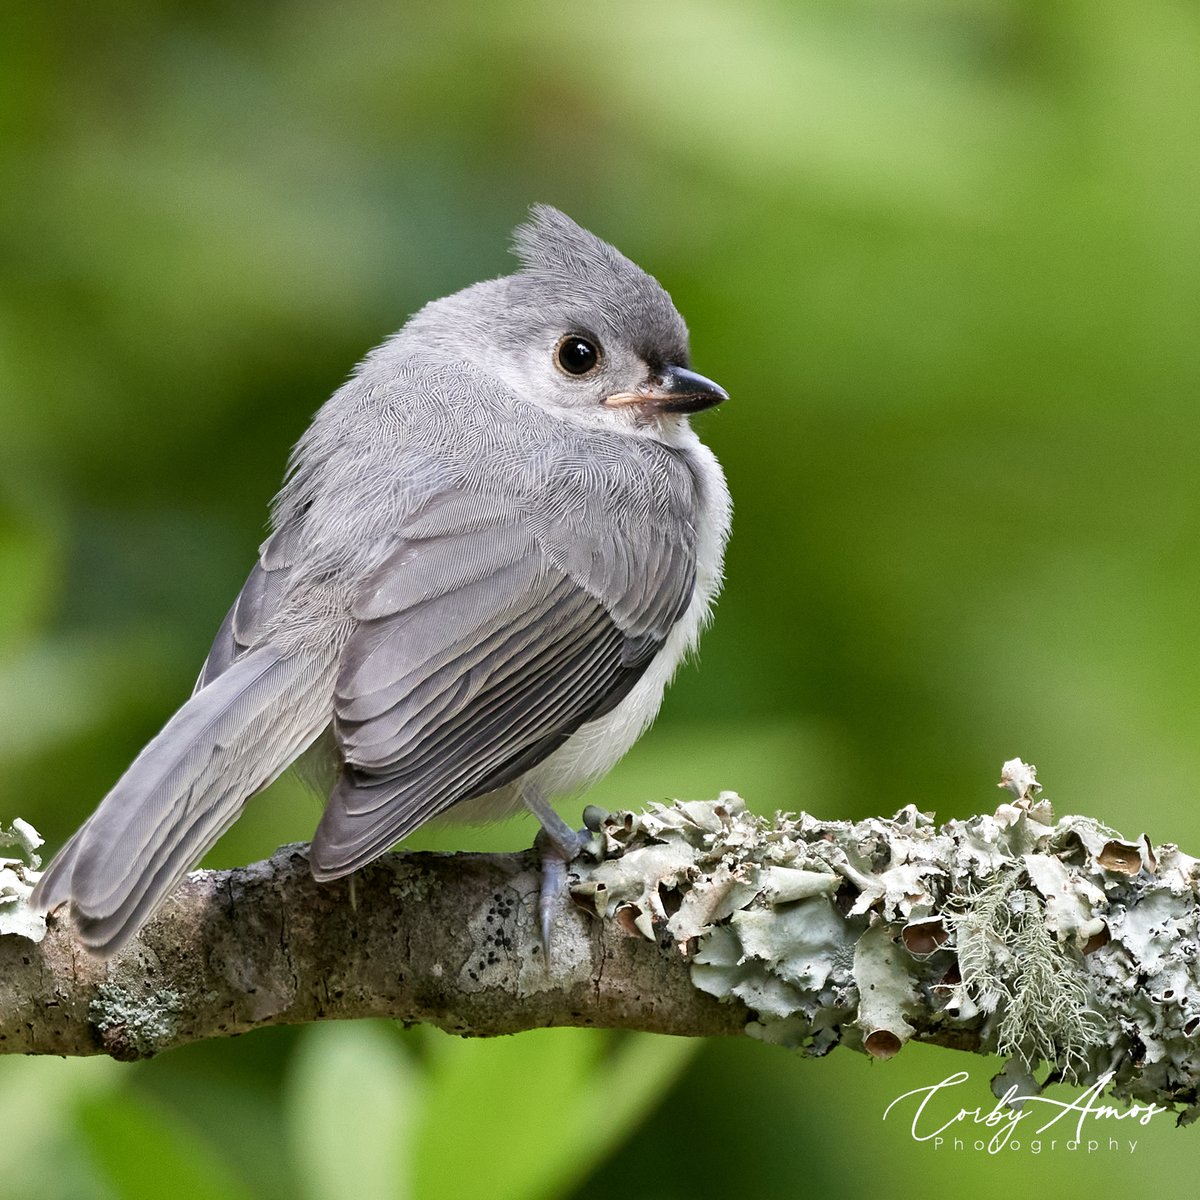 Have to go with another fledgling pic on #titmousetuesday. Tufted Titmouse.
.
linktr.ee/corbyamos
.
#birdphotography #birdwatching #birding #BirdTwitter #twitterbirds #birdpics